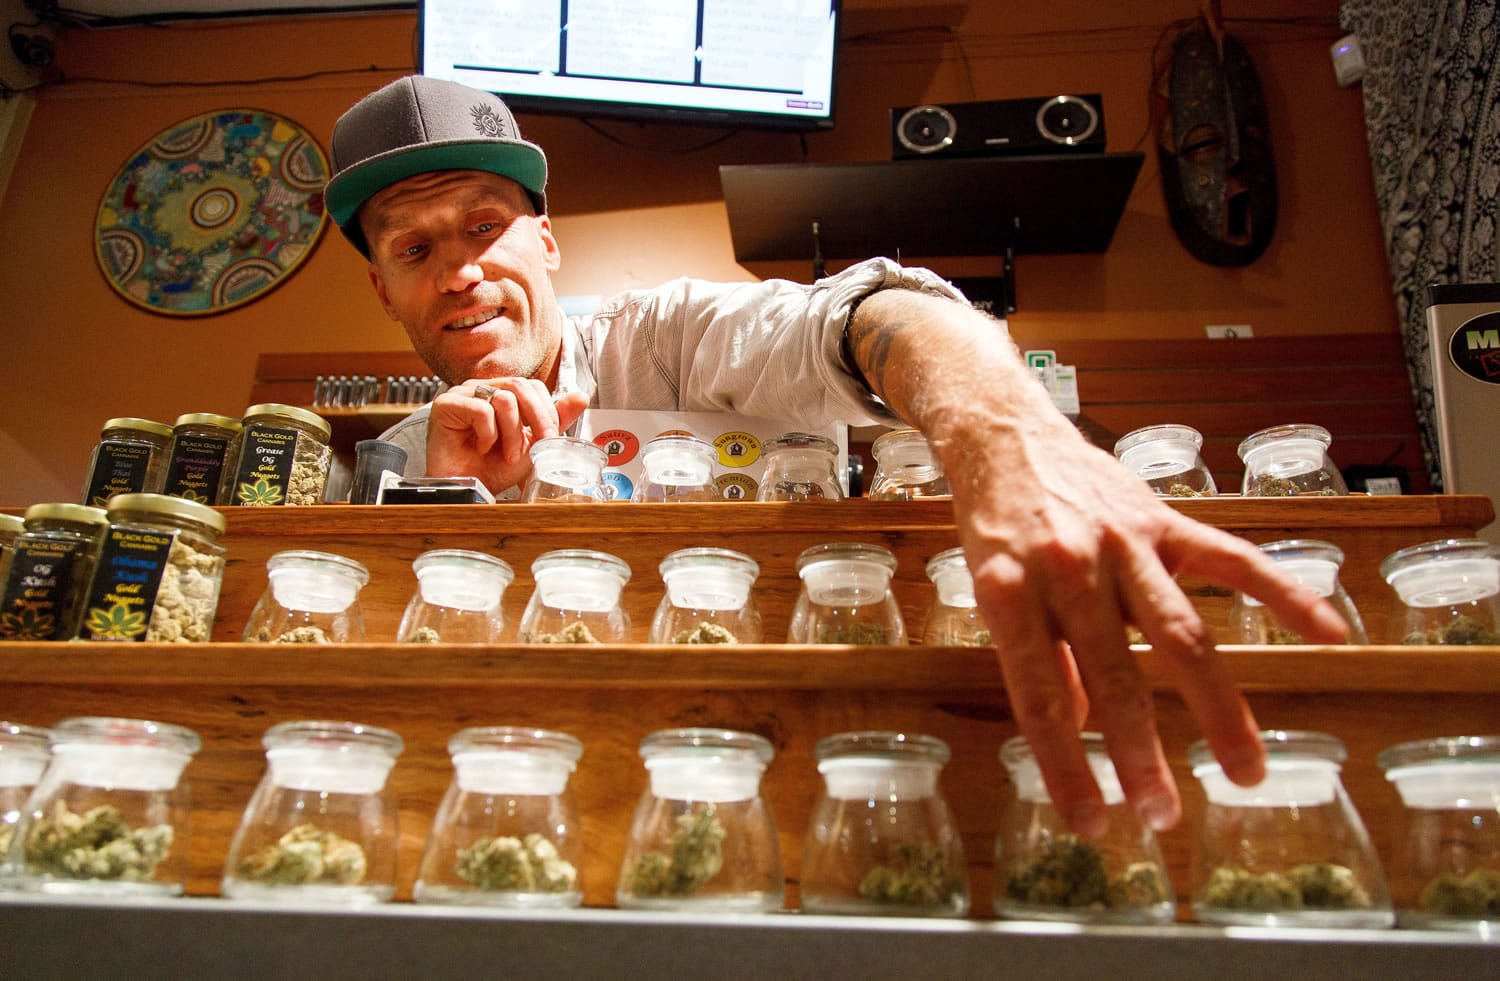 Shane Cavanaugh, owner of Amazon Organics, a pot dispensary in Eugene, Ore., arranges the cannabis display Monday in his store. Medical marijuana dispensaries in Oregon will be able to sell recreational marijuana starting today.